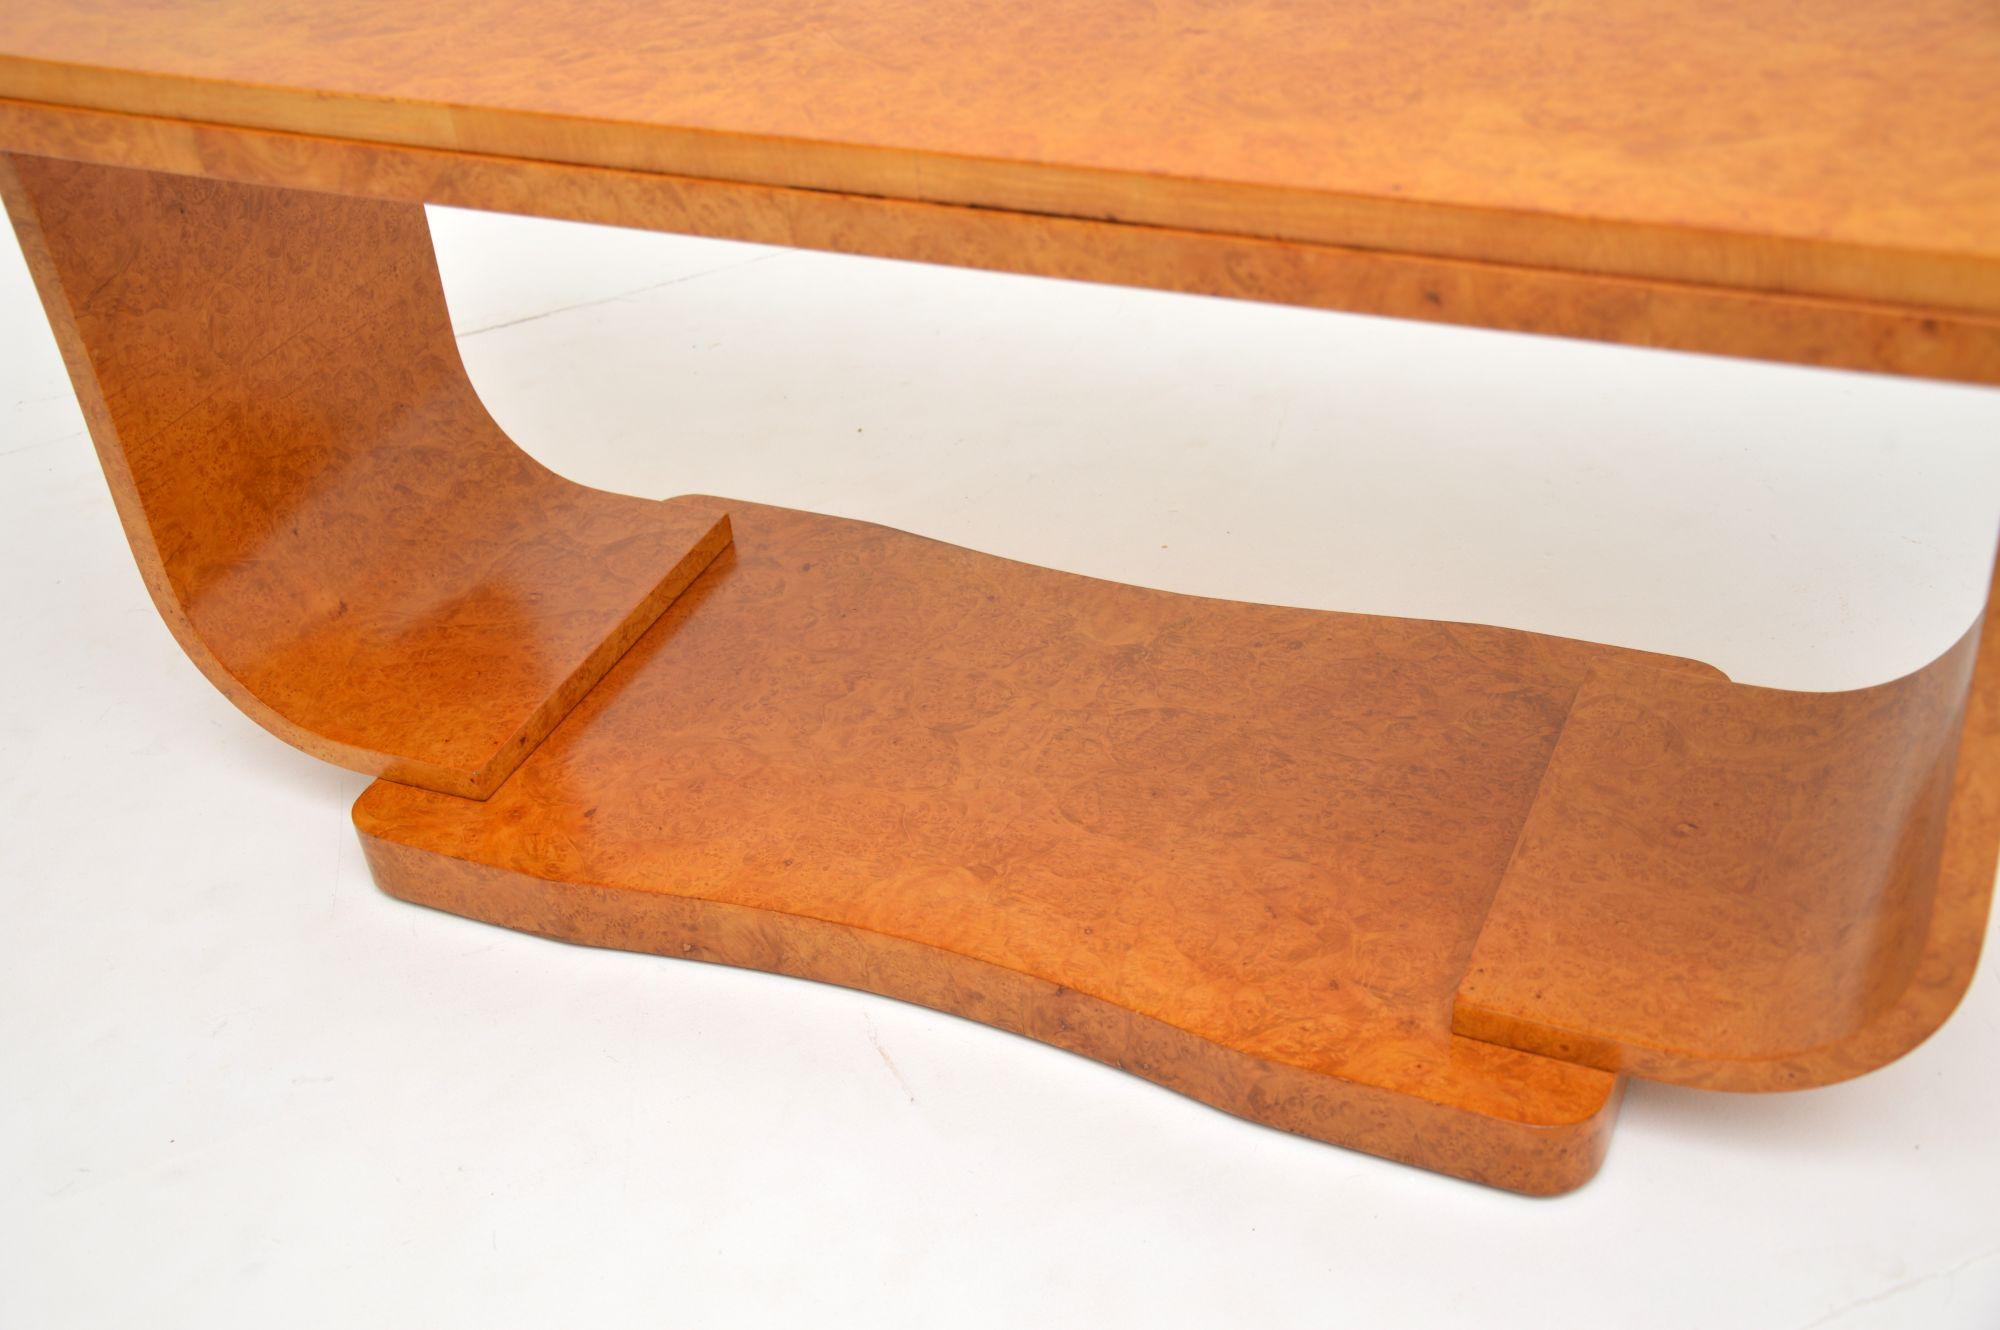 Early 20th Century Art Deco Burr Maple Coffee Table by Epstein